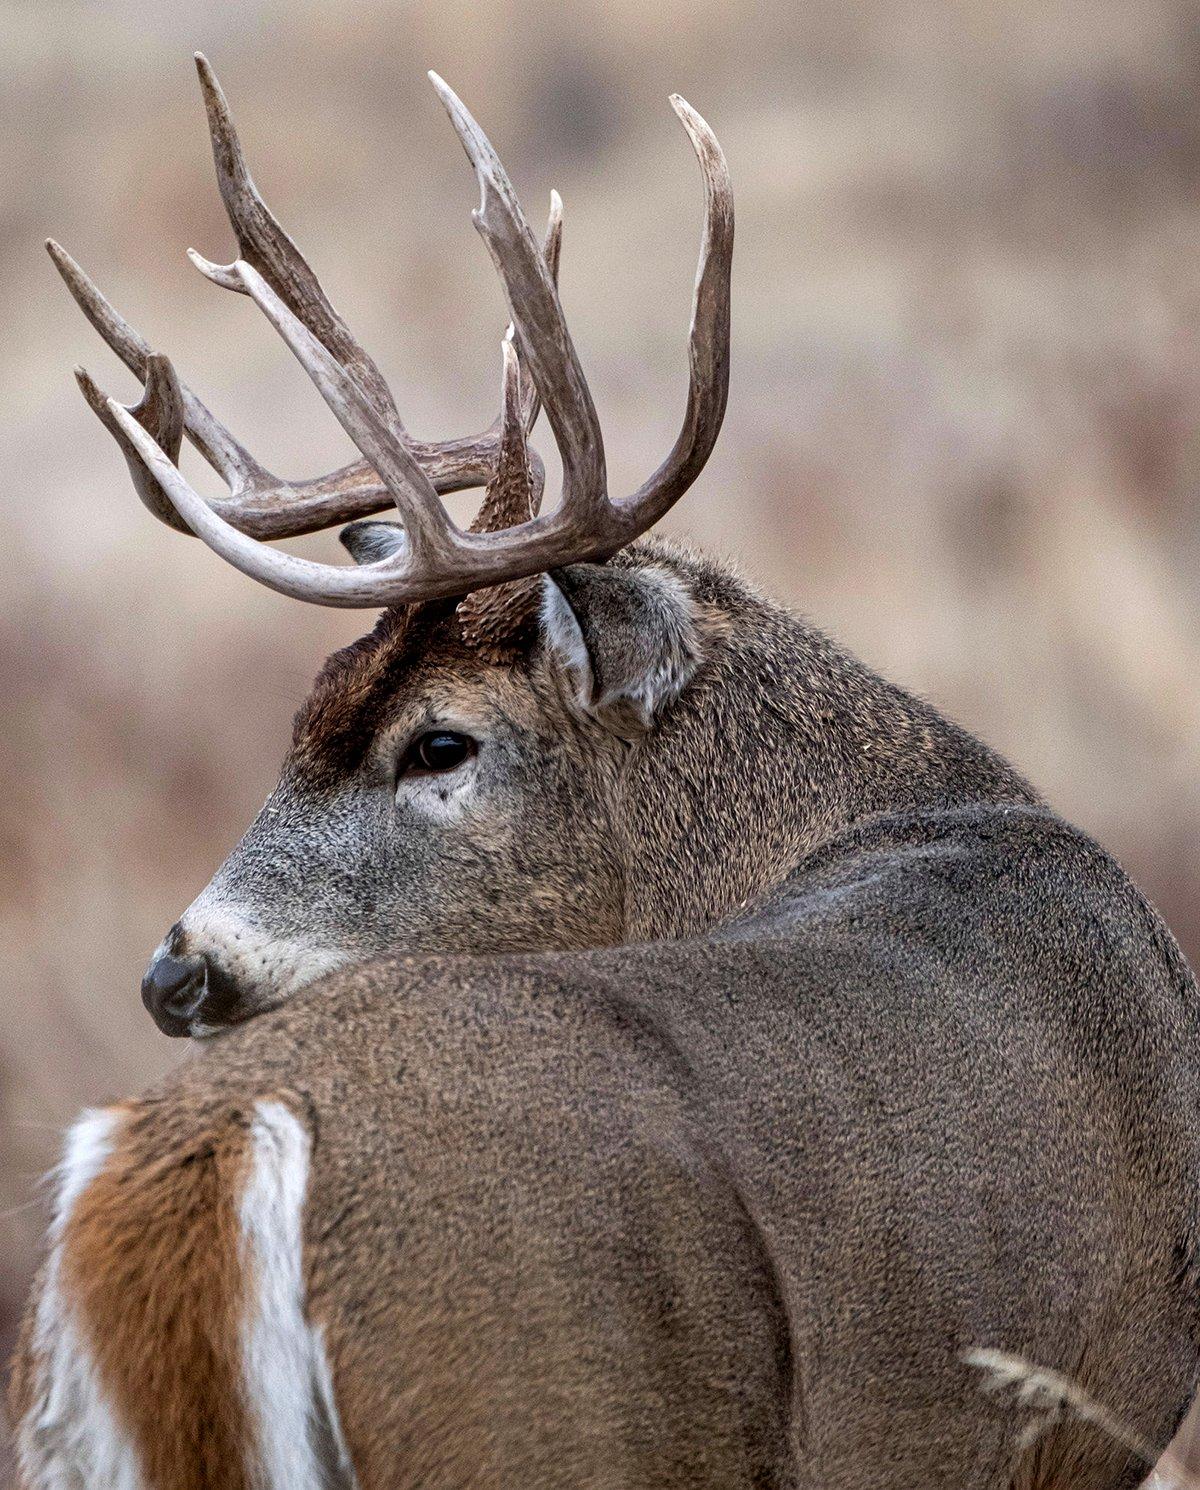 The whitetail restoration is a true success story. Image by John Hafner